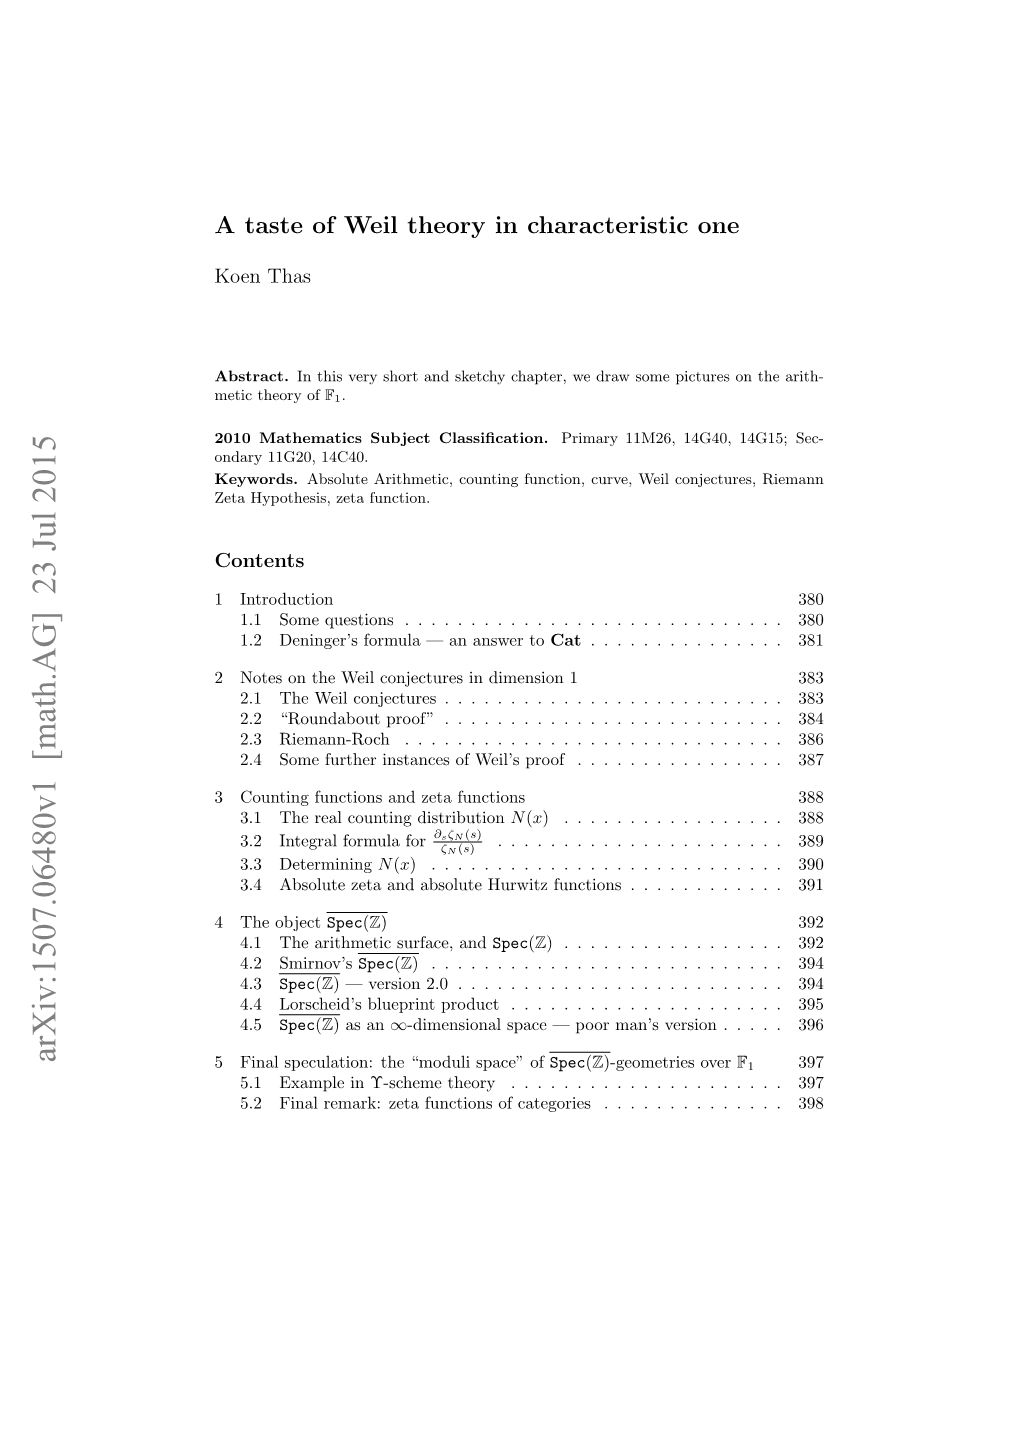 A Taste of Weil Theory in Characteristic One